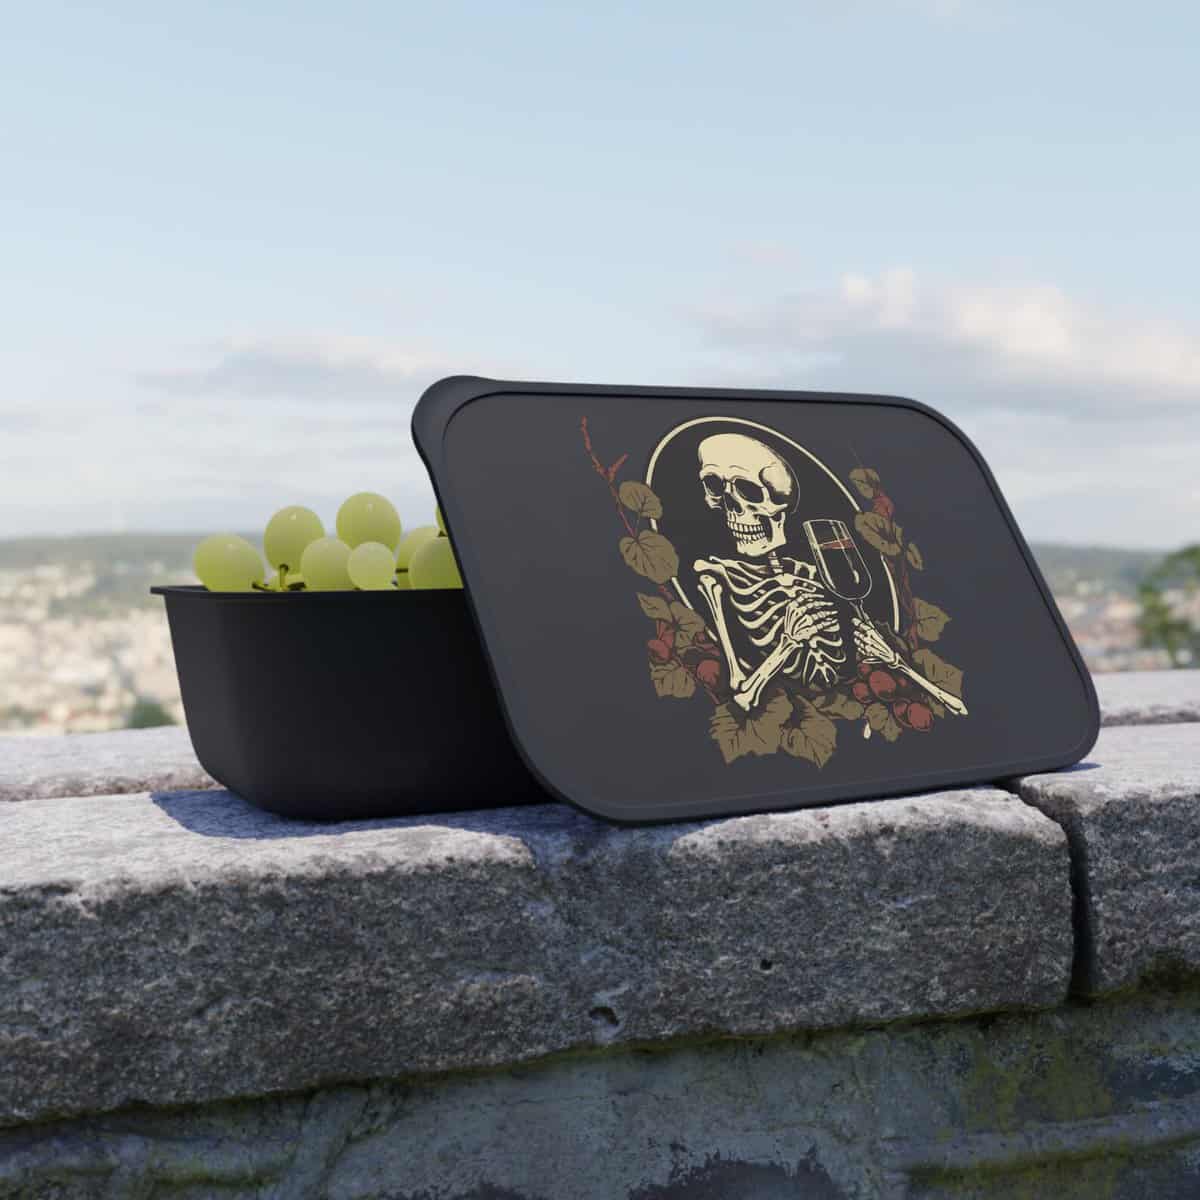 A black lunch box with a skeleton on it and grapes.